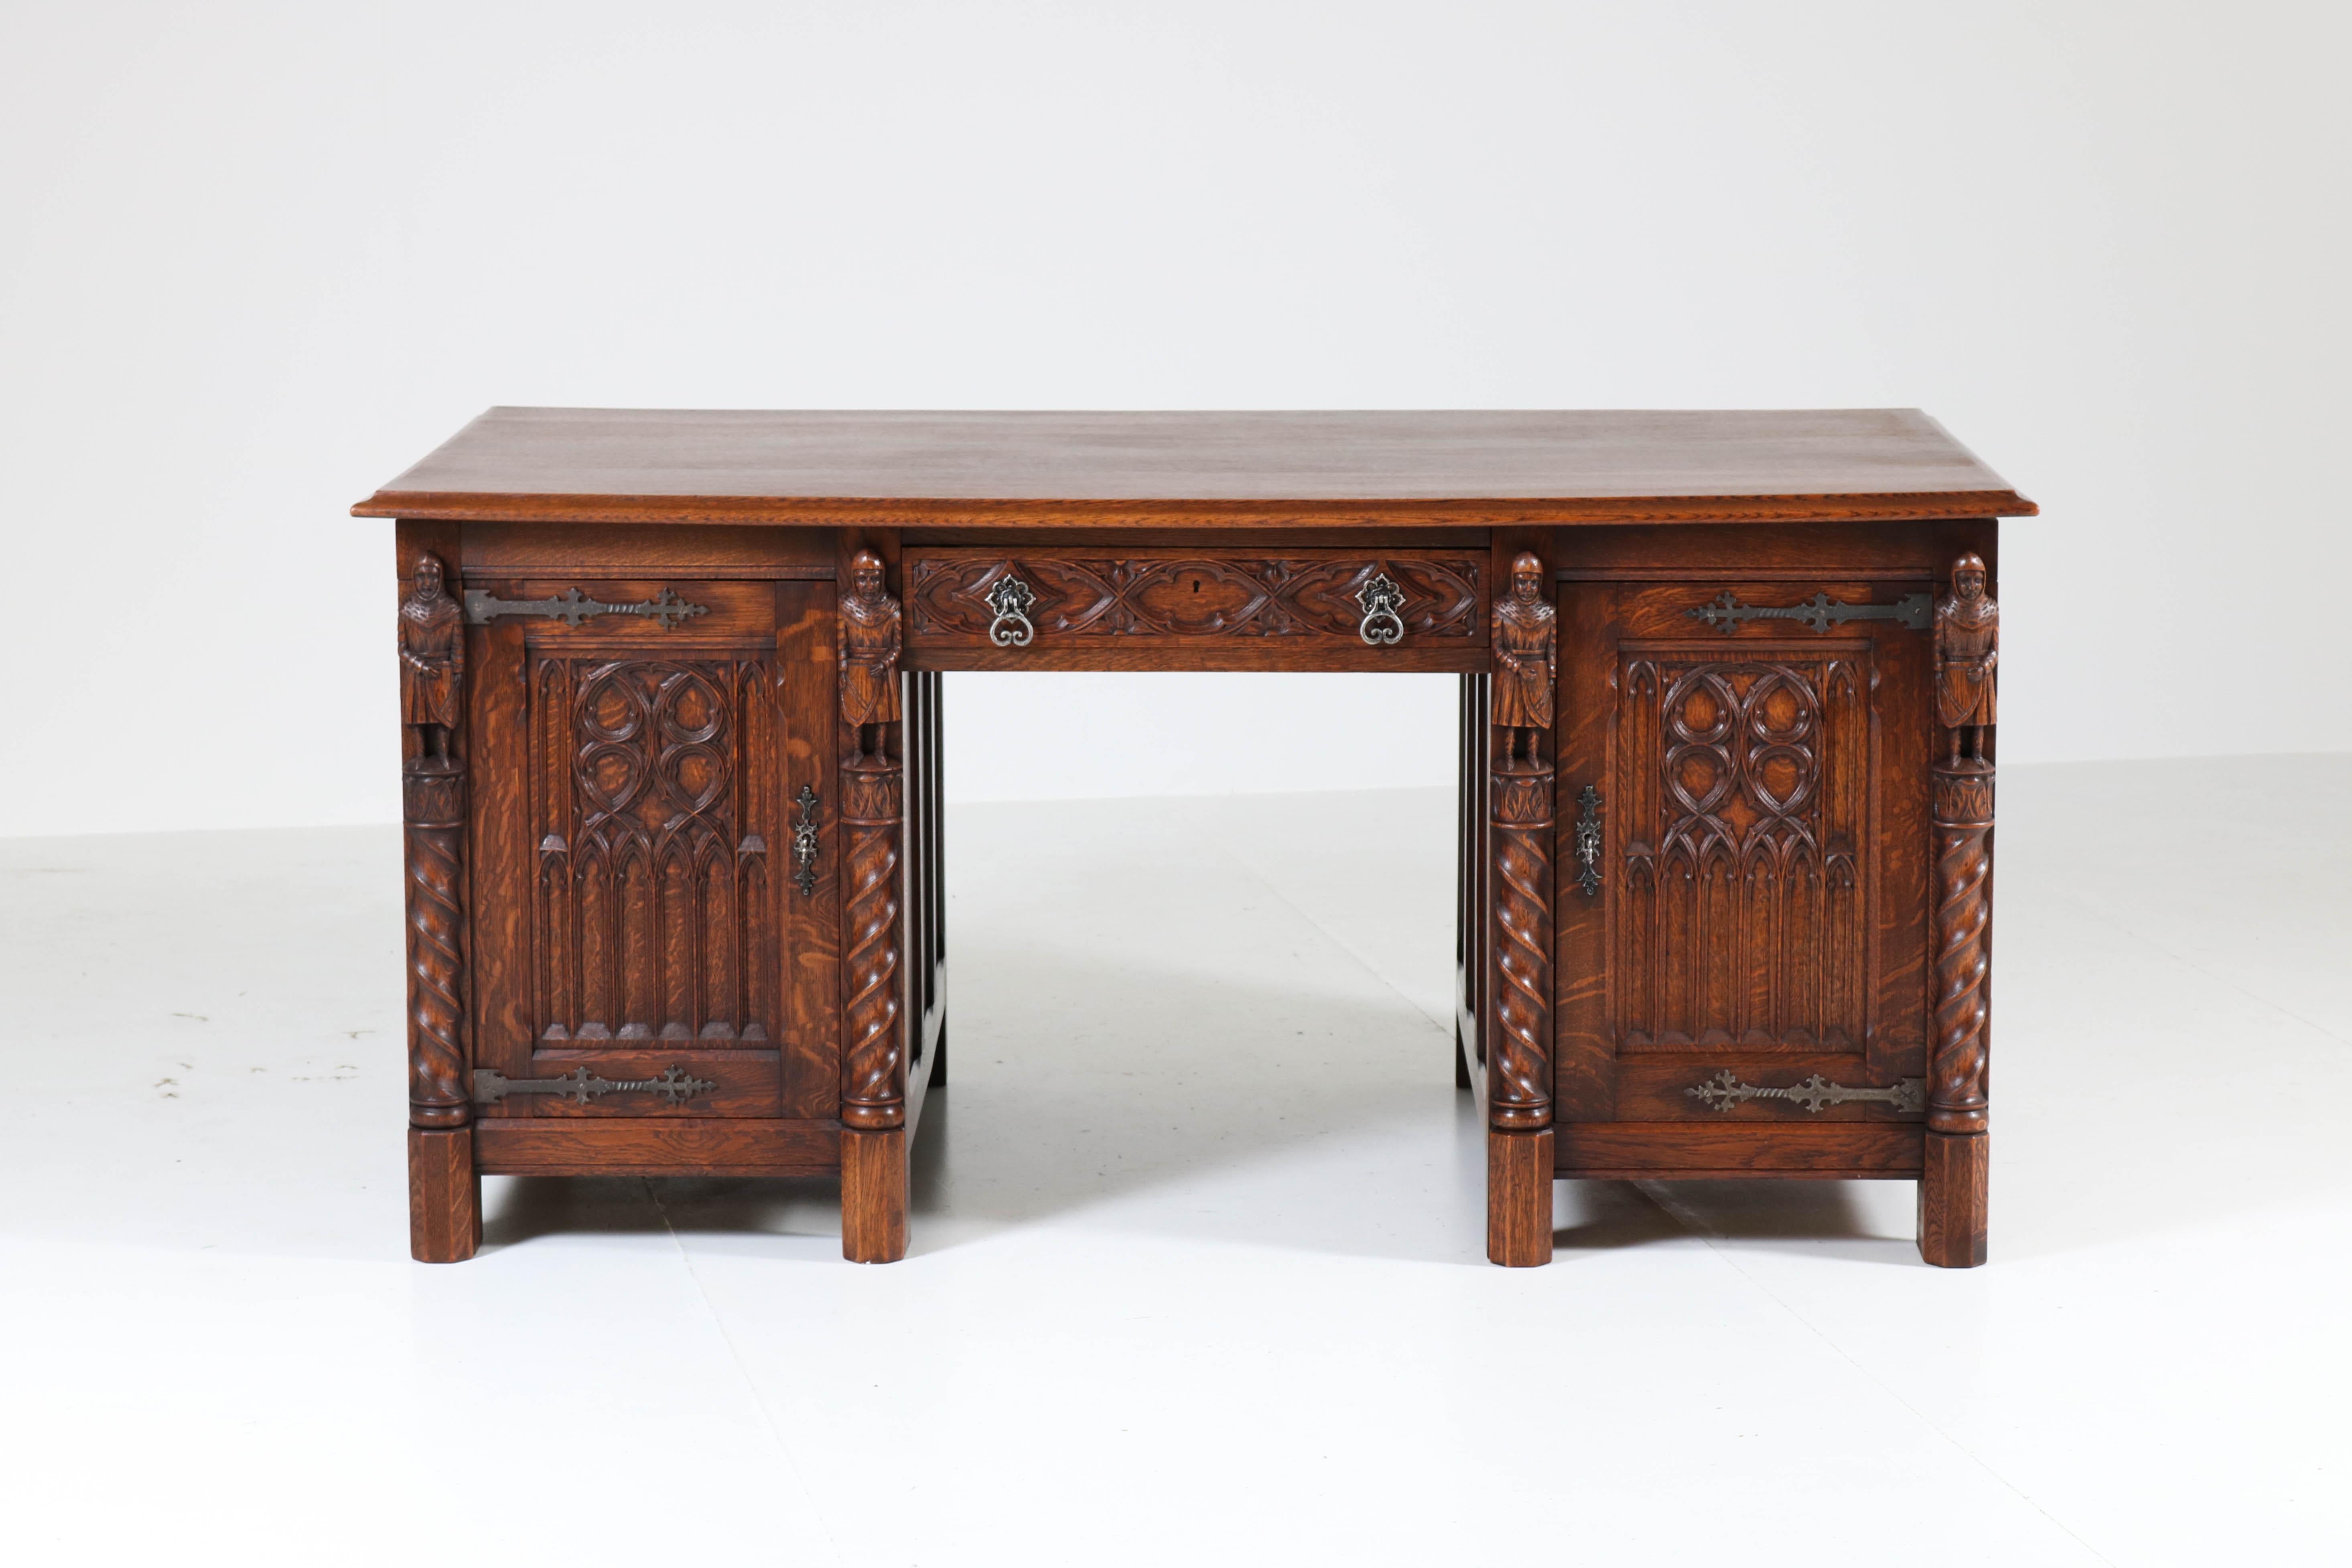 Wonderful Gothic Revival solid oak pedestal desk, 1940s.
With four hand carved knights and hand carved panels on the front with drawer.
Nice hand carved panels on the side as well on the backside, so
this stunning piece can be placed in the